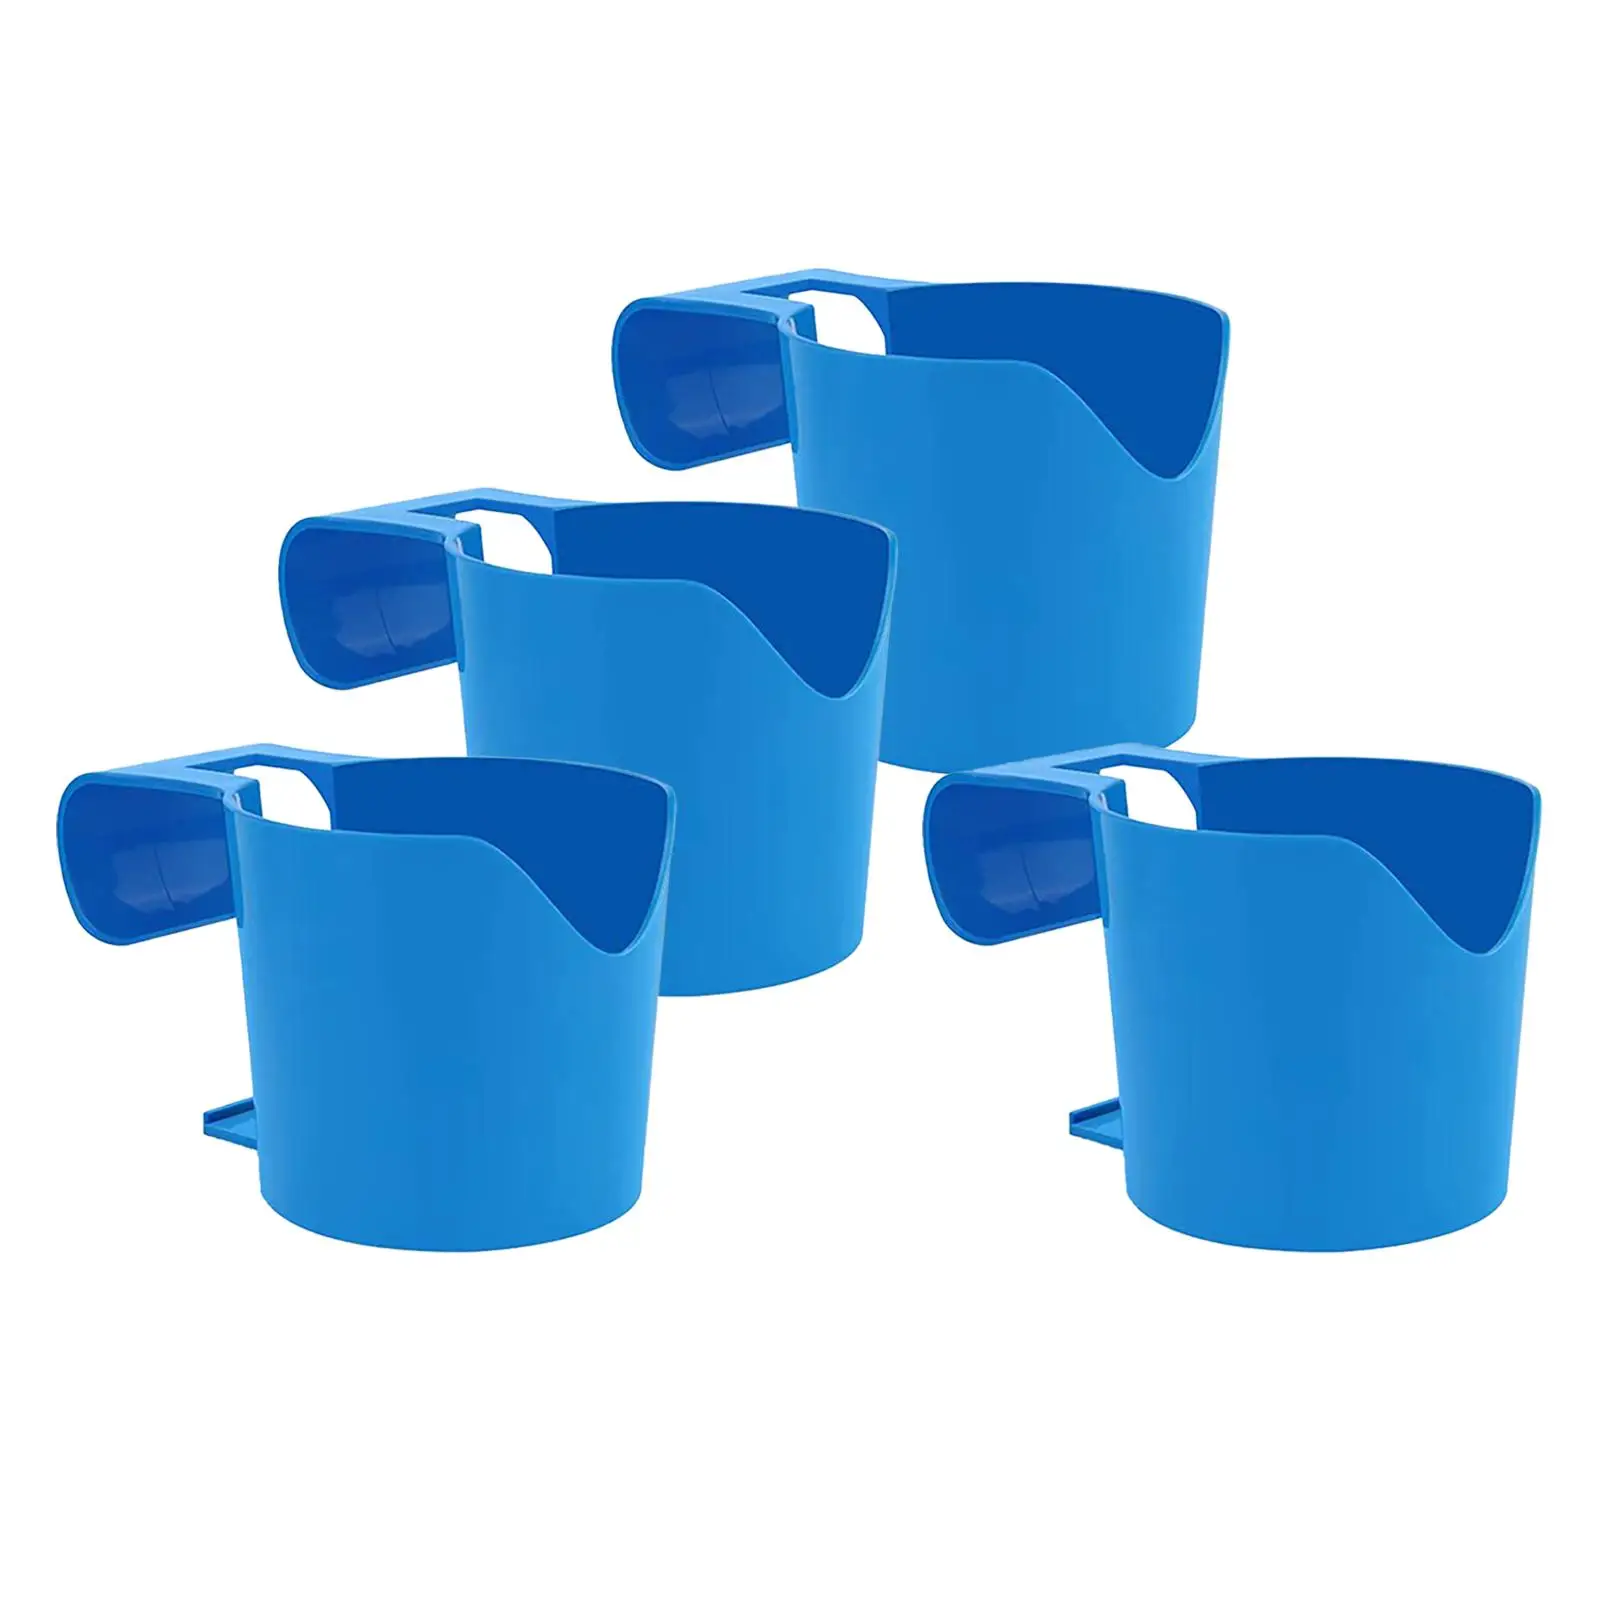 4x Poolside Cup Holders Multifunctional Pool Storage Shelf Pool Cup Holder for Inflatable Hot Tub Beverage Accessories